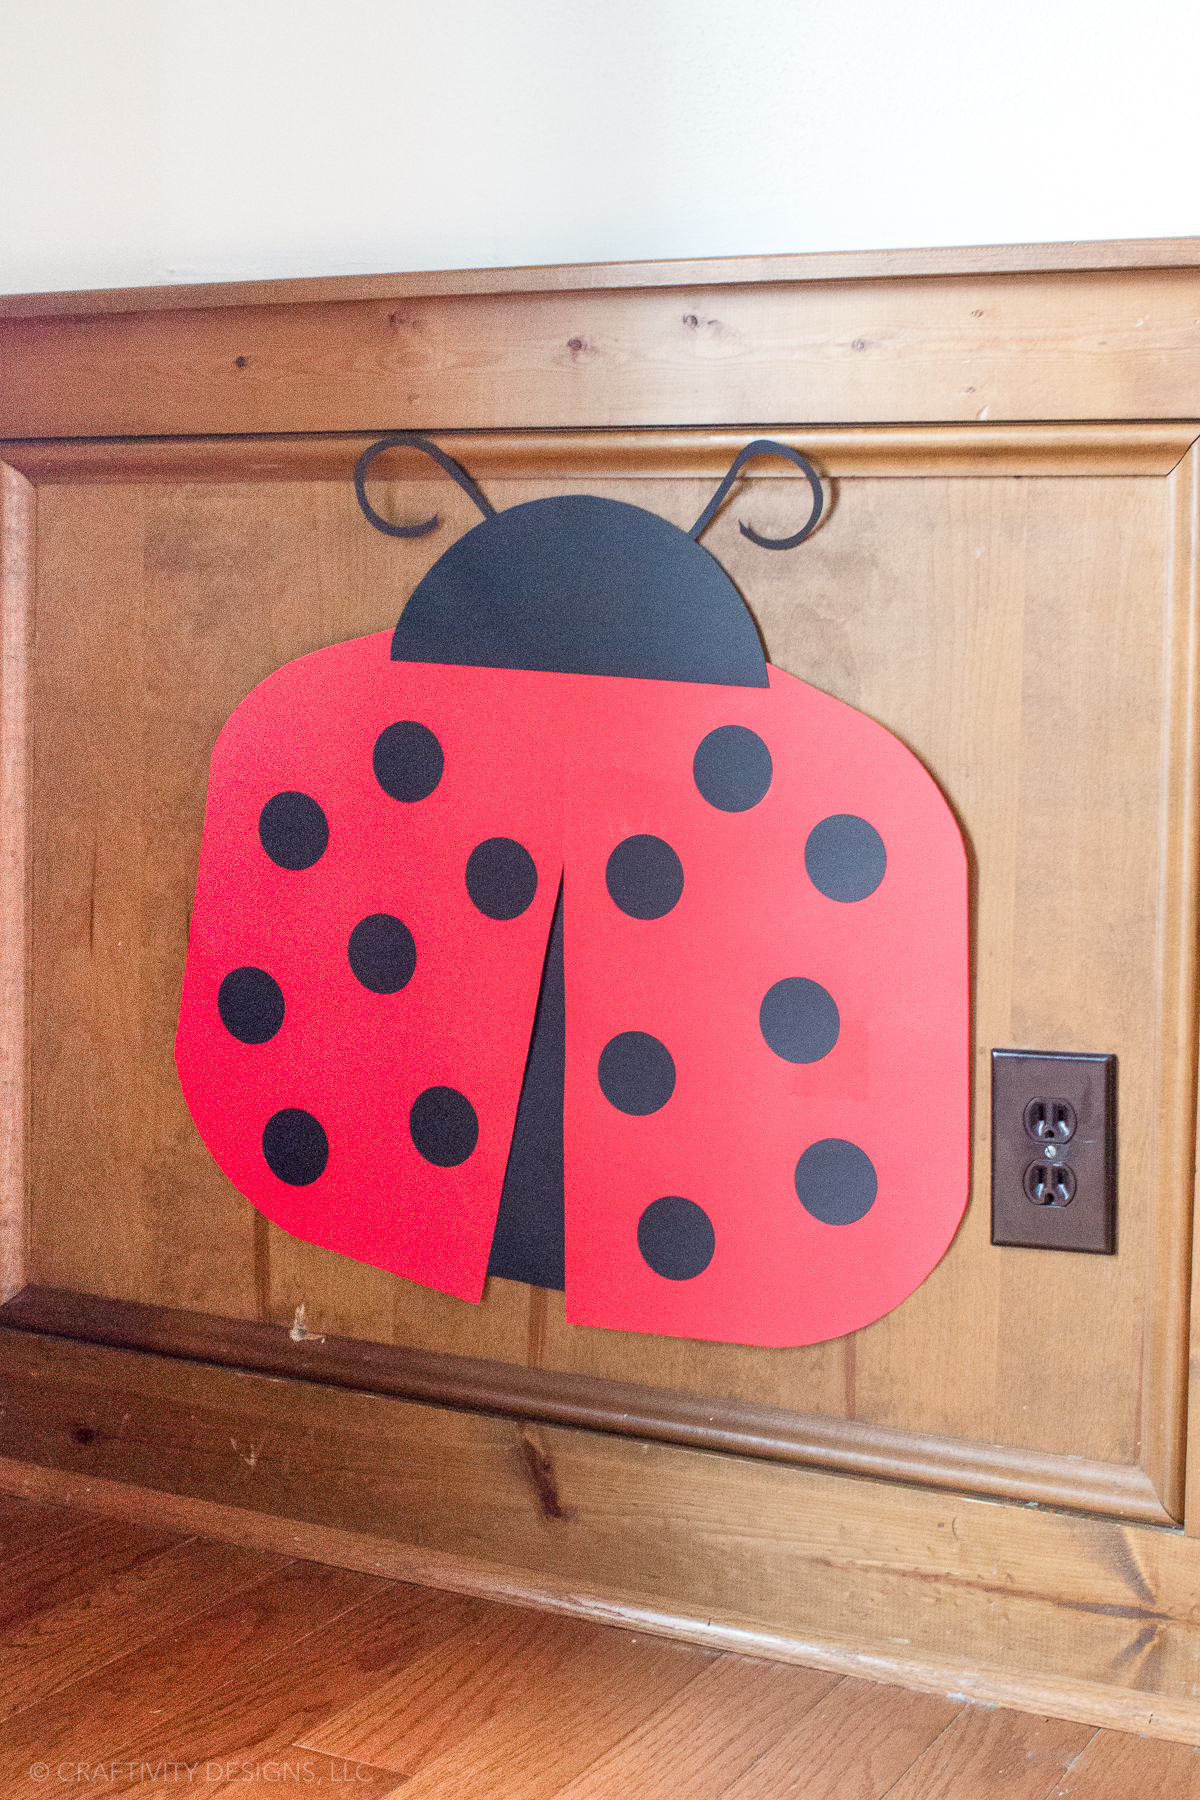 Pin the Spot on the Ladybug Game - Easy DIY Game for Ladybug Party